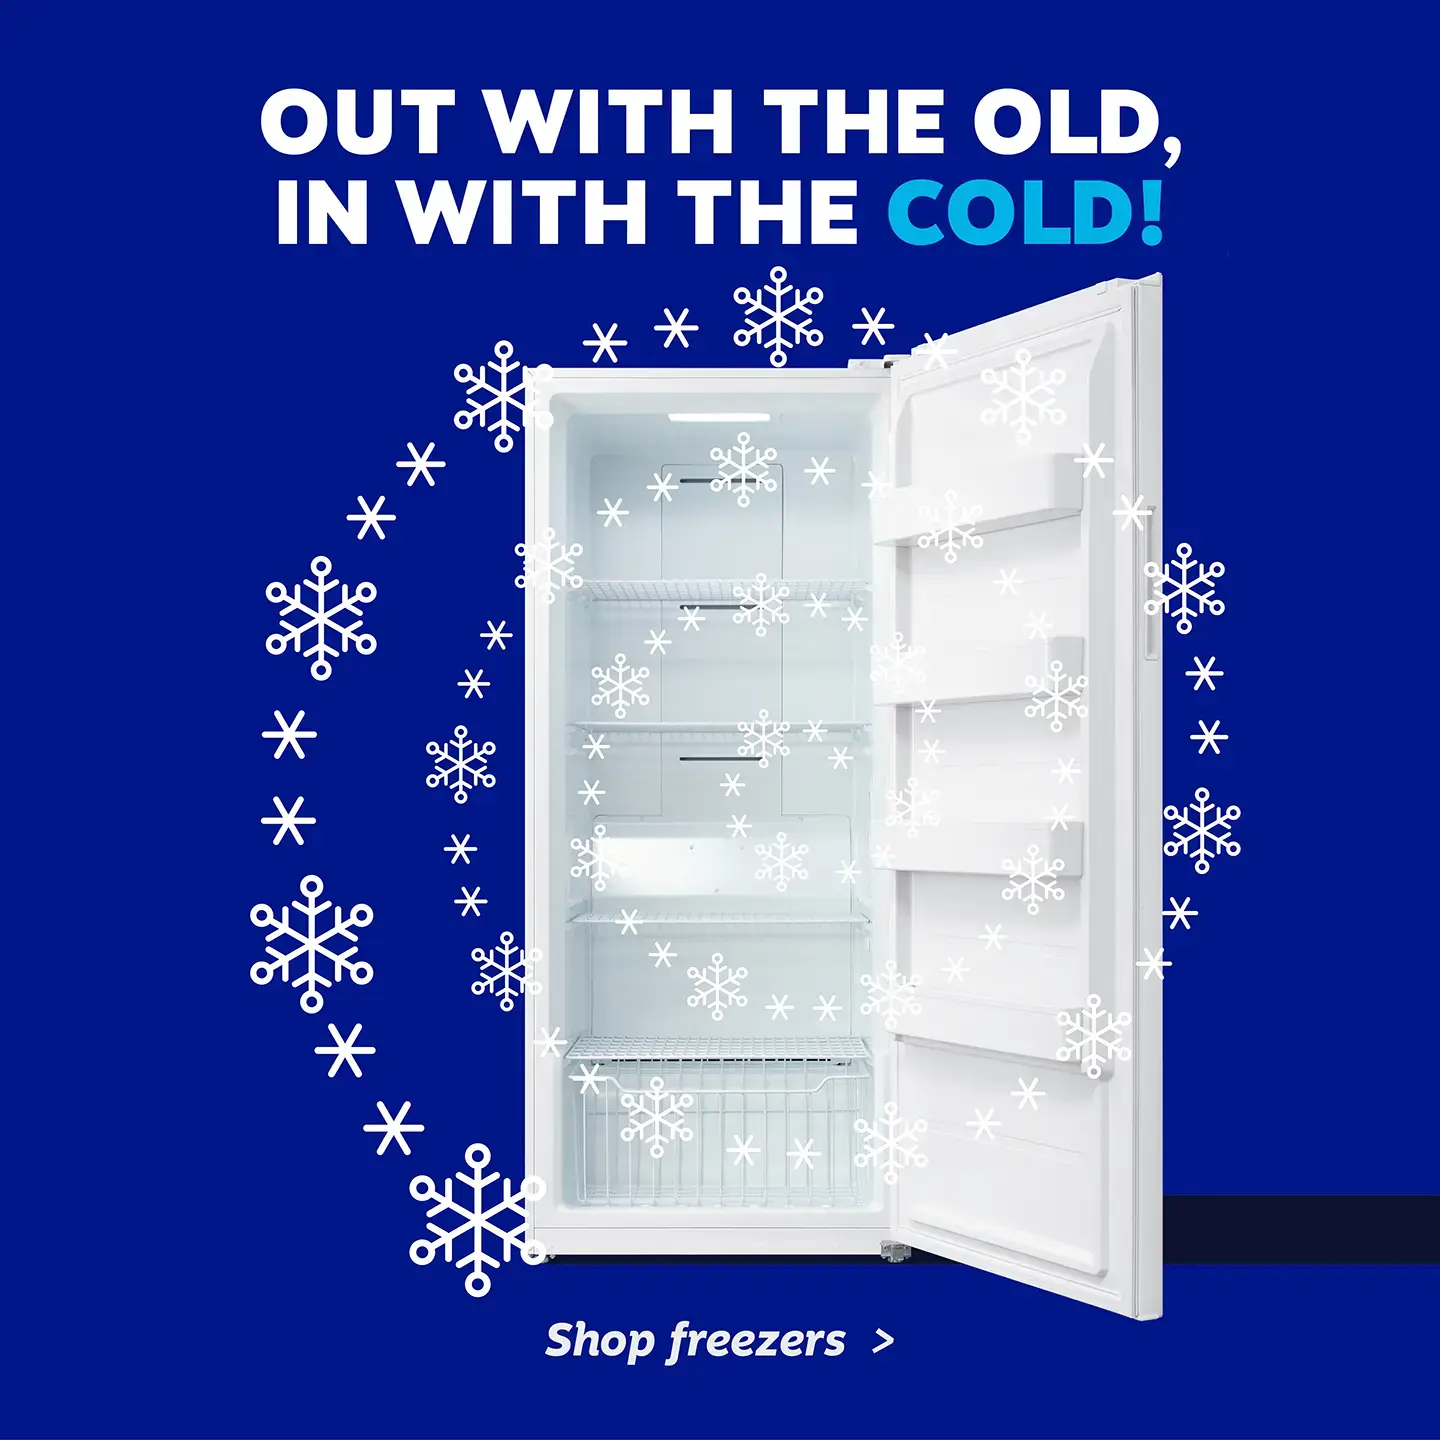 Out with the old, in with the cold! Shop freezers